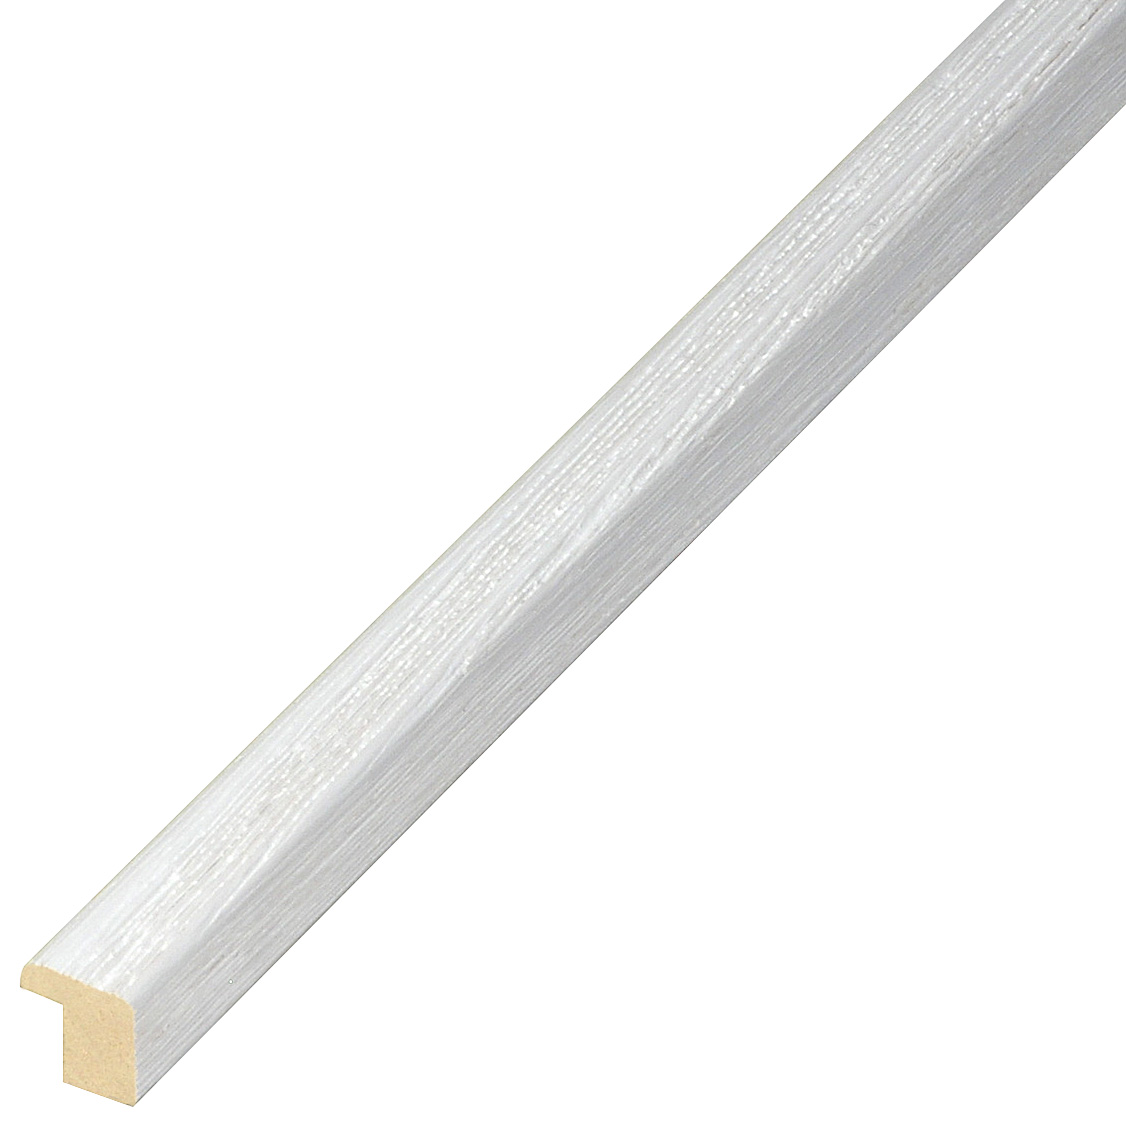 Moulding ayous woodworm treated mm 13x13 - scratched finish - White - 311BIANCO